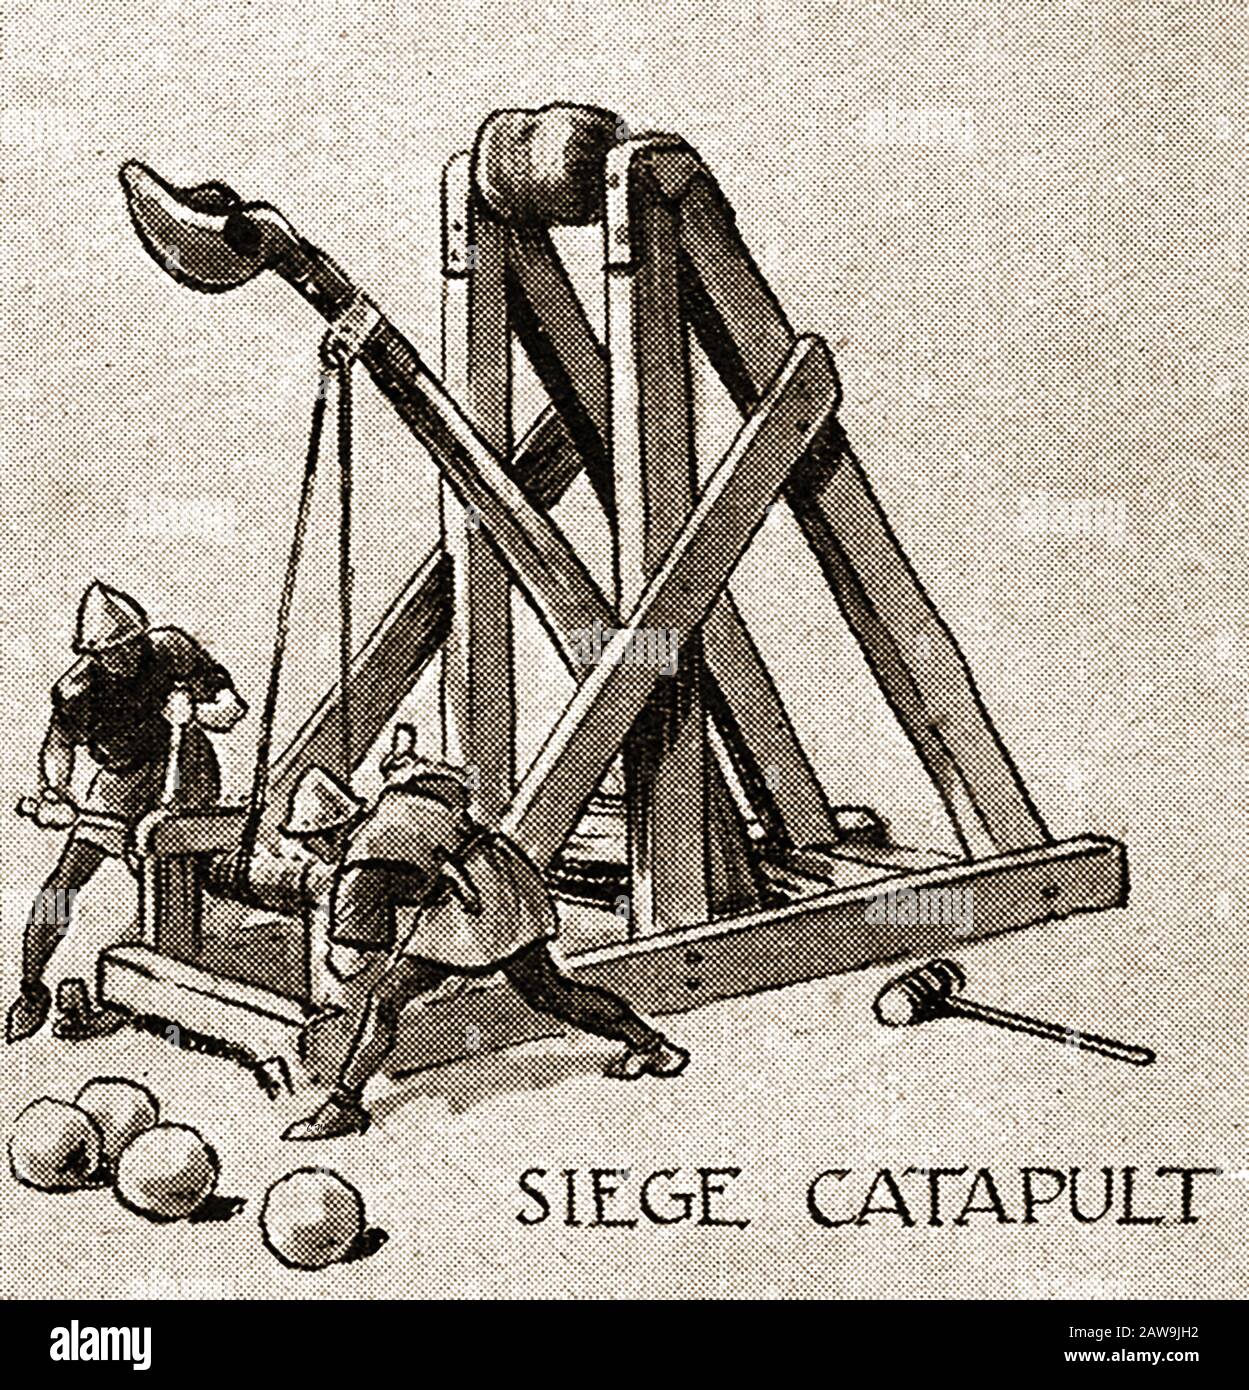 A 1940's illustration showing historic battle weapons - Siege Catapult Stock Photo